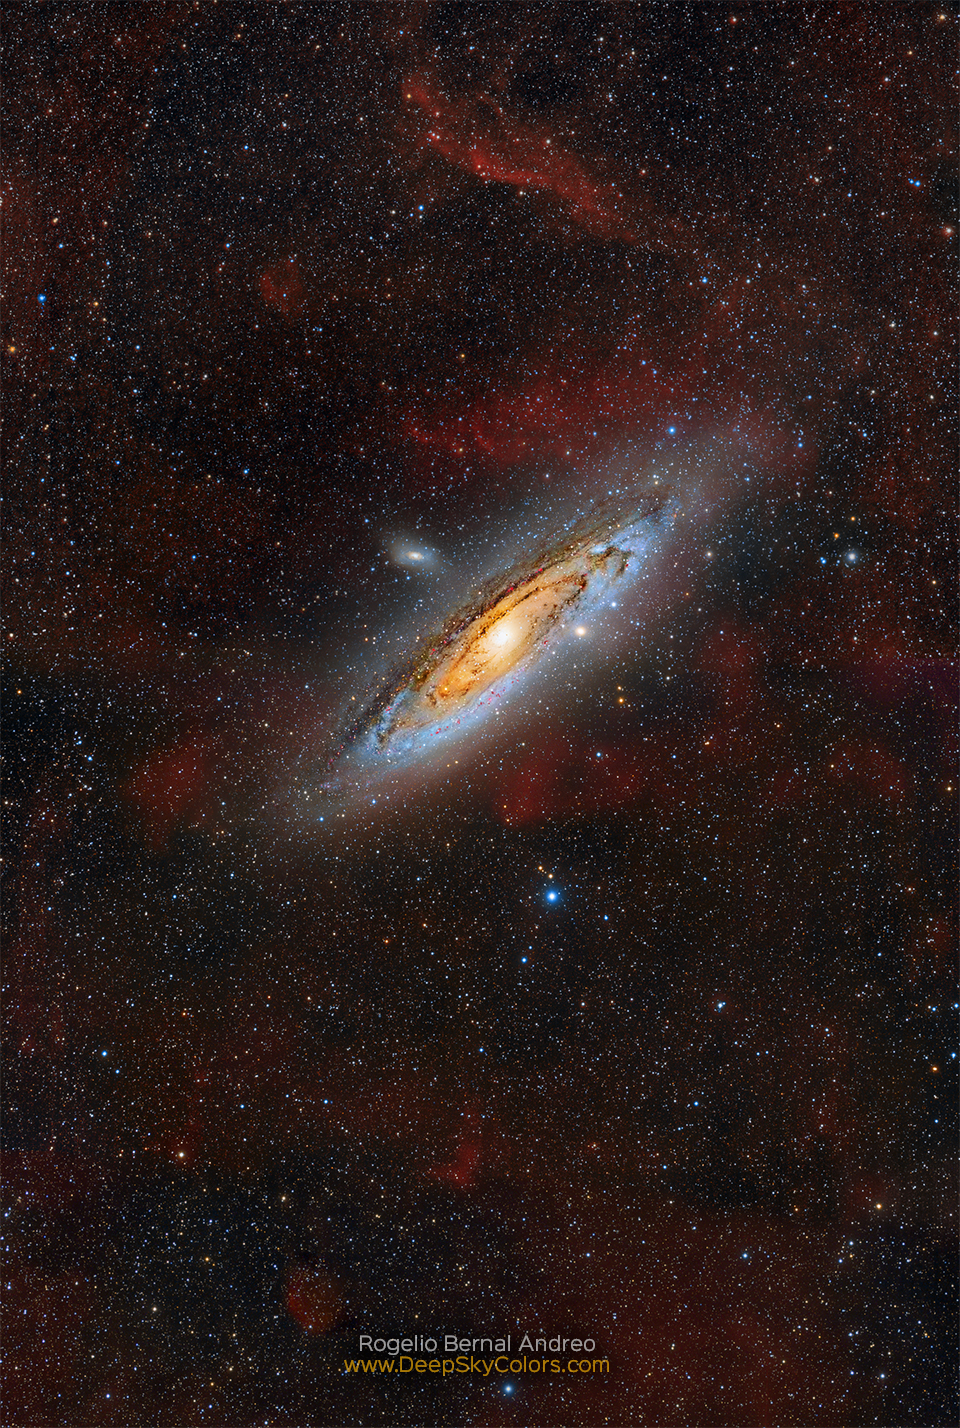 Astronomy Picture of the Day RBA_DS_CloudsOfAndromeda2_960